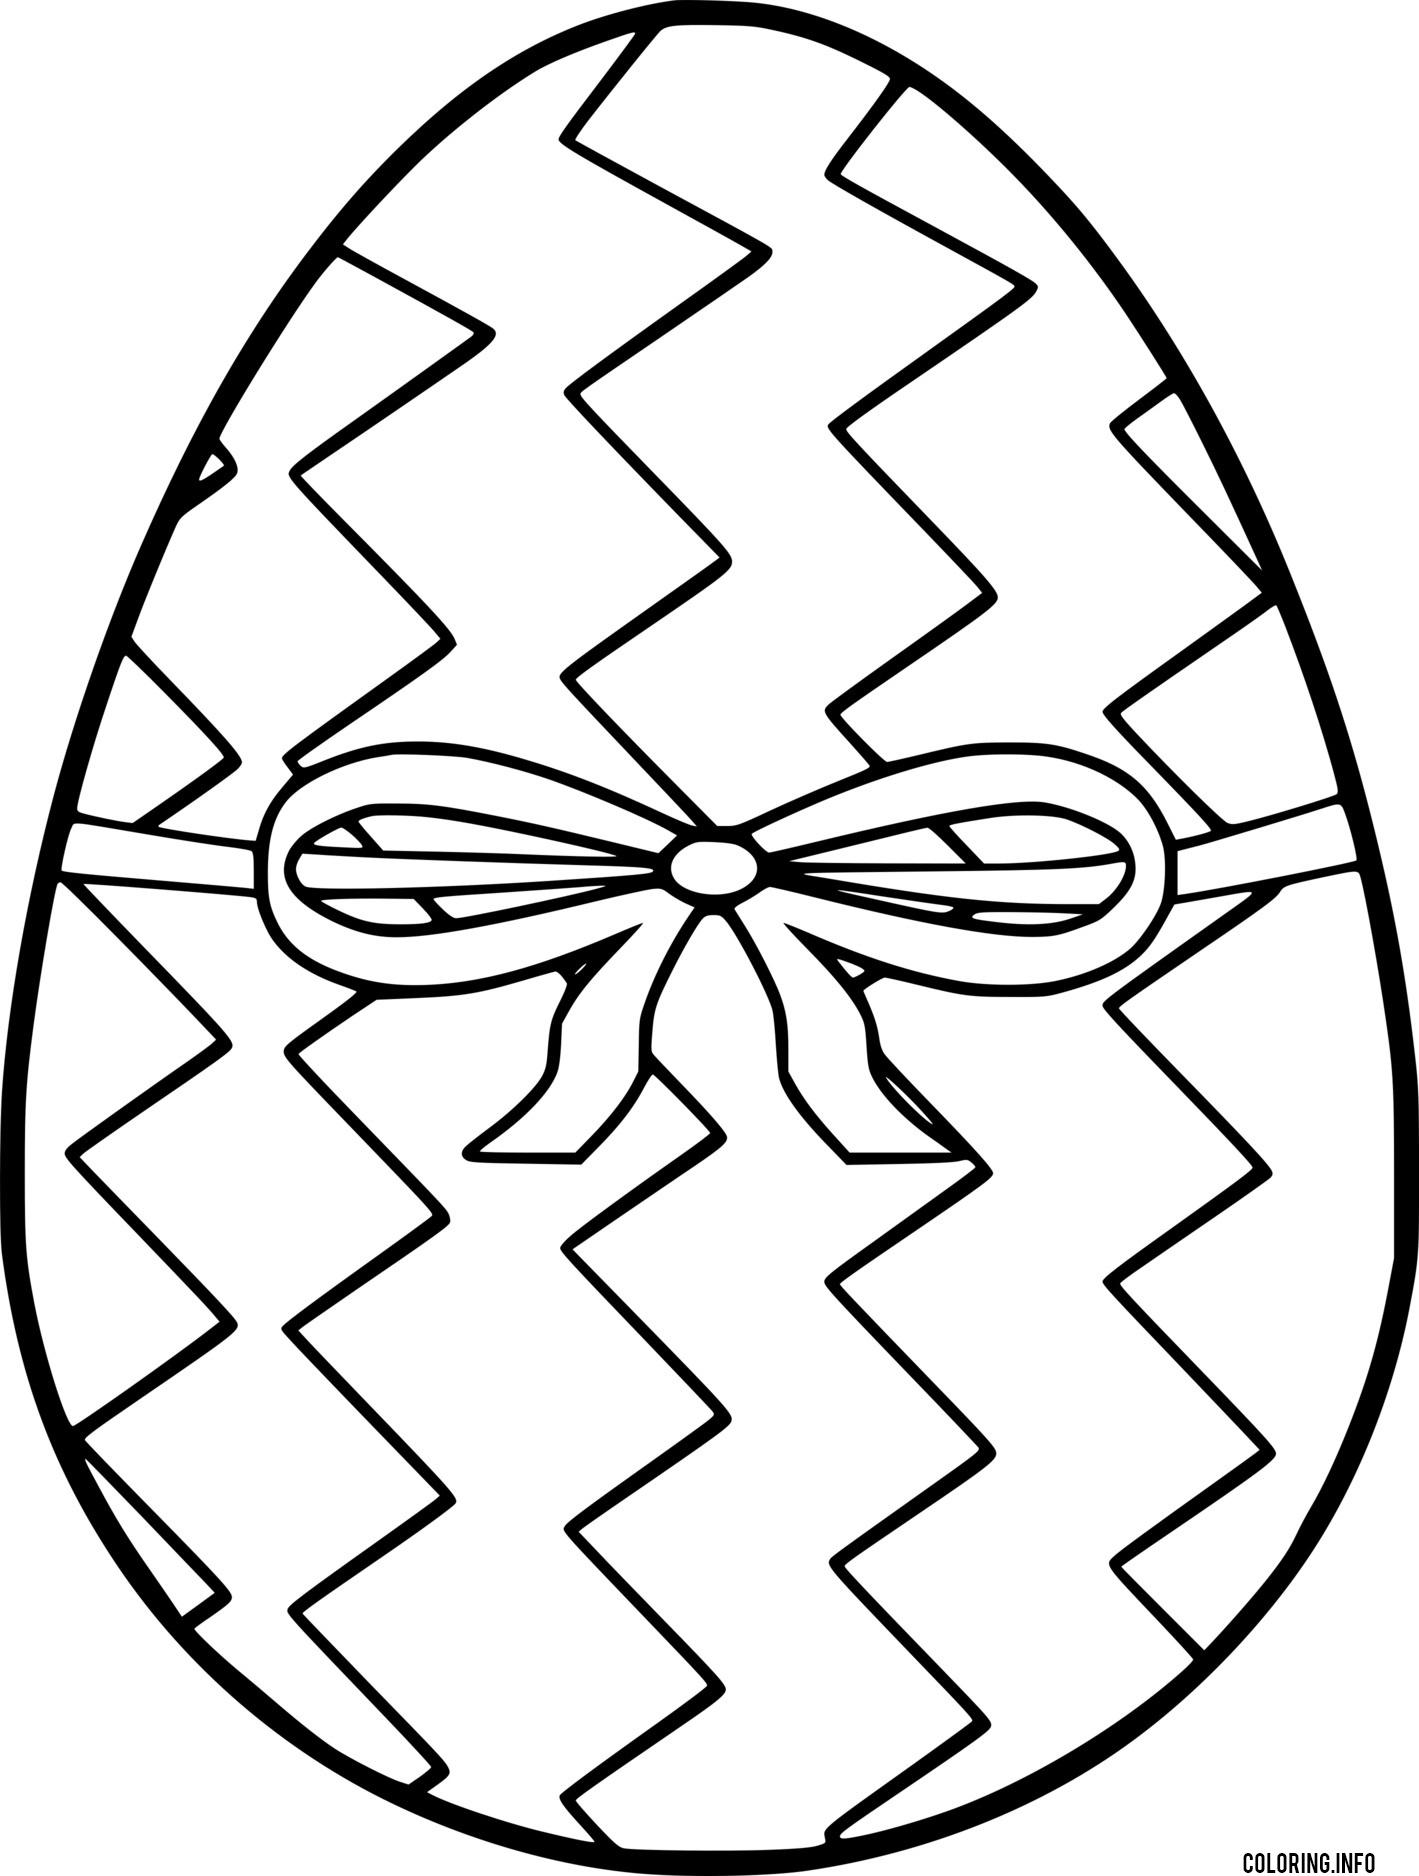 Easter Egg With Fold Line And Bowknot coloring